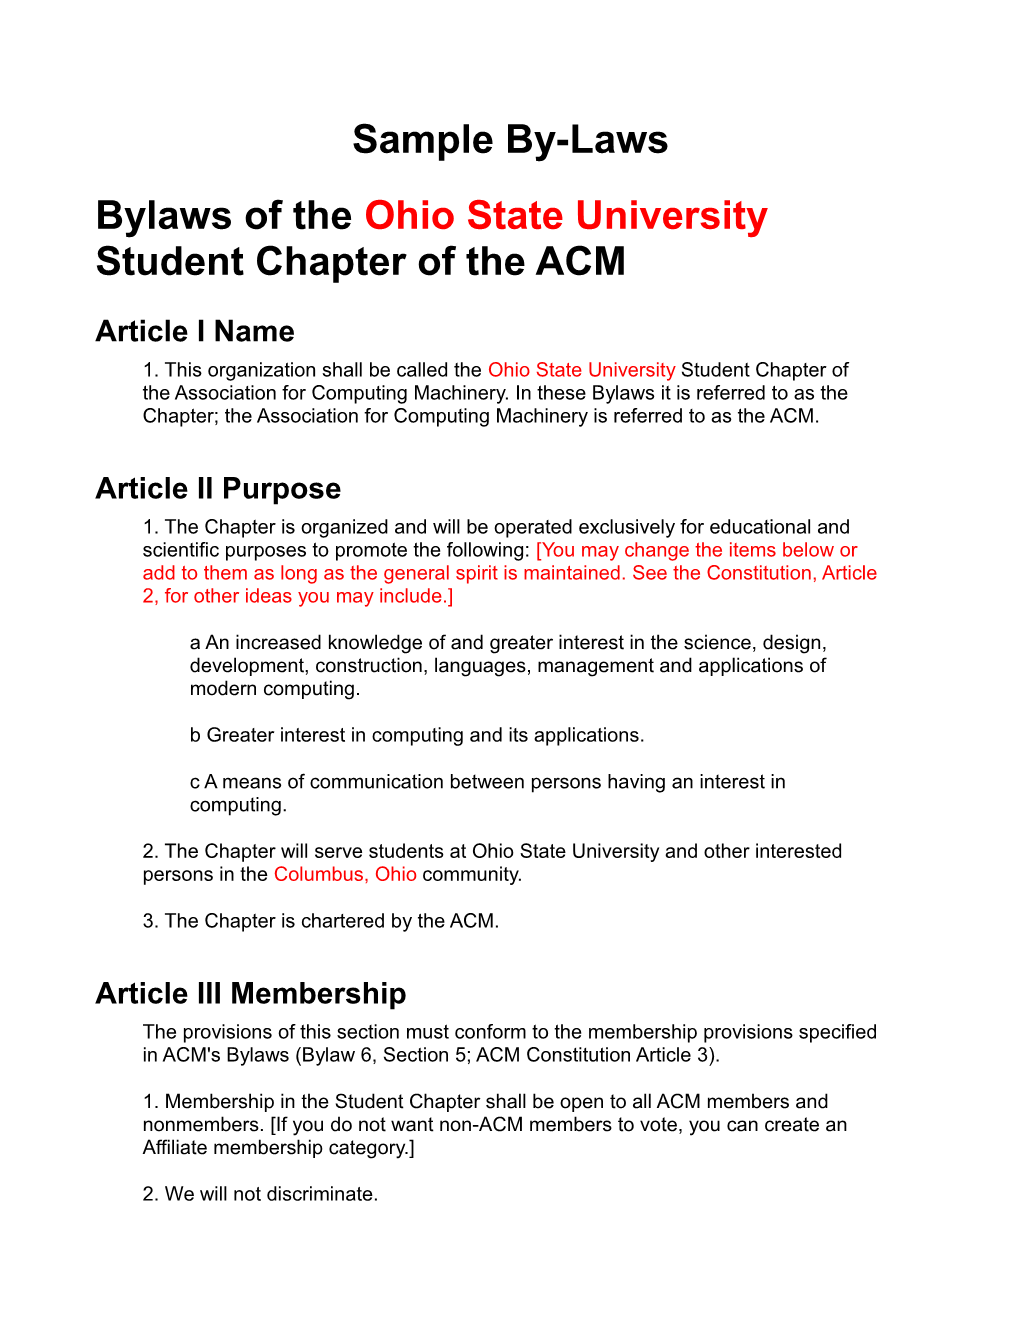 Bylaws of the Ohio State University Student Chapter of the ACM